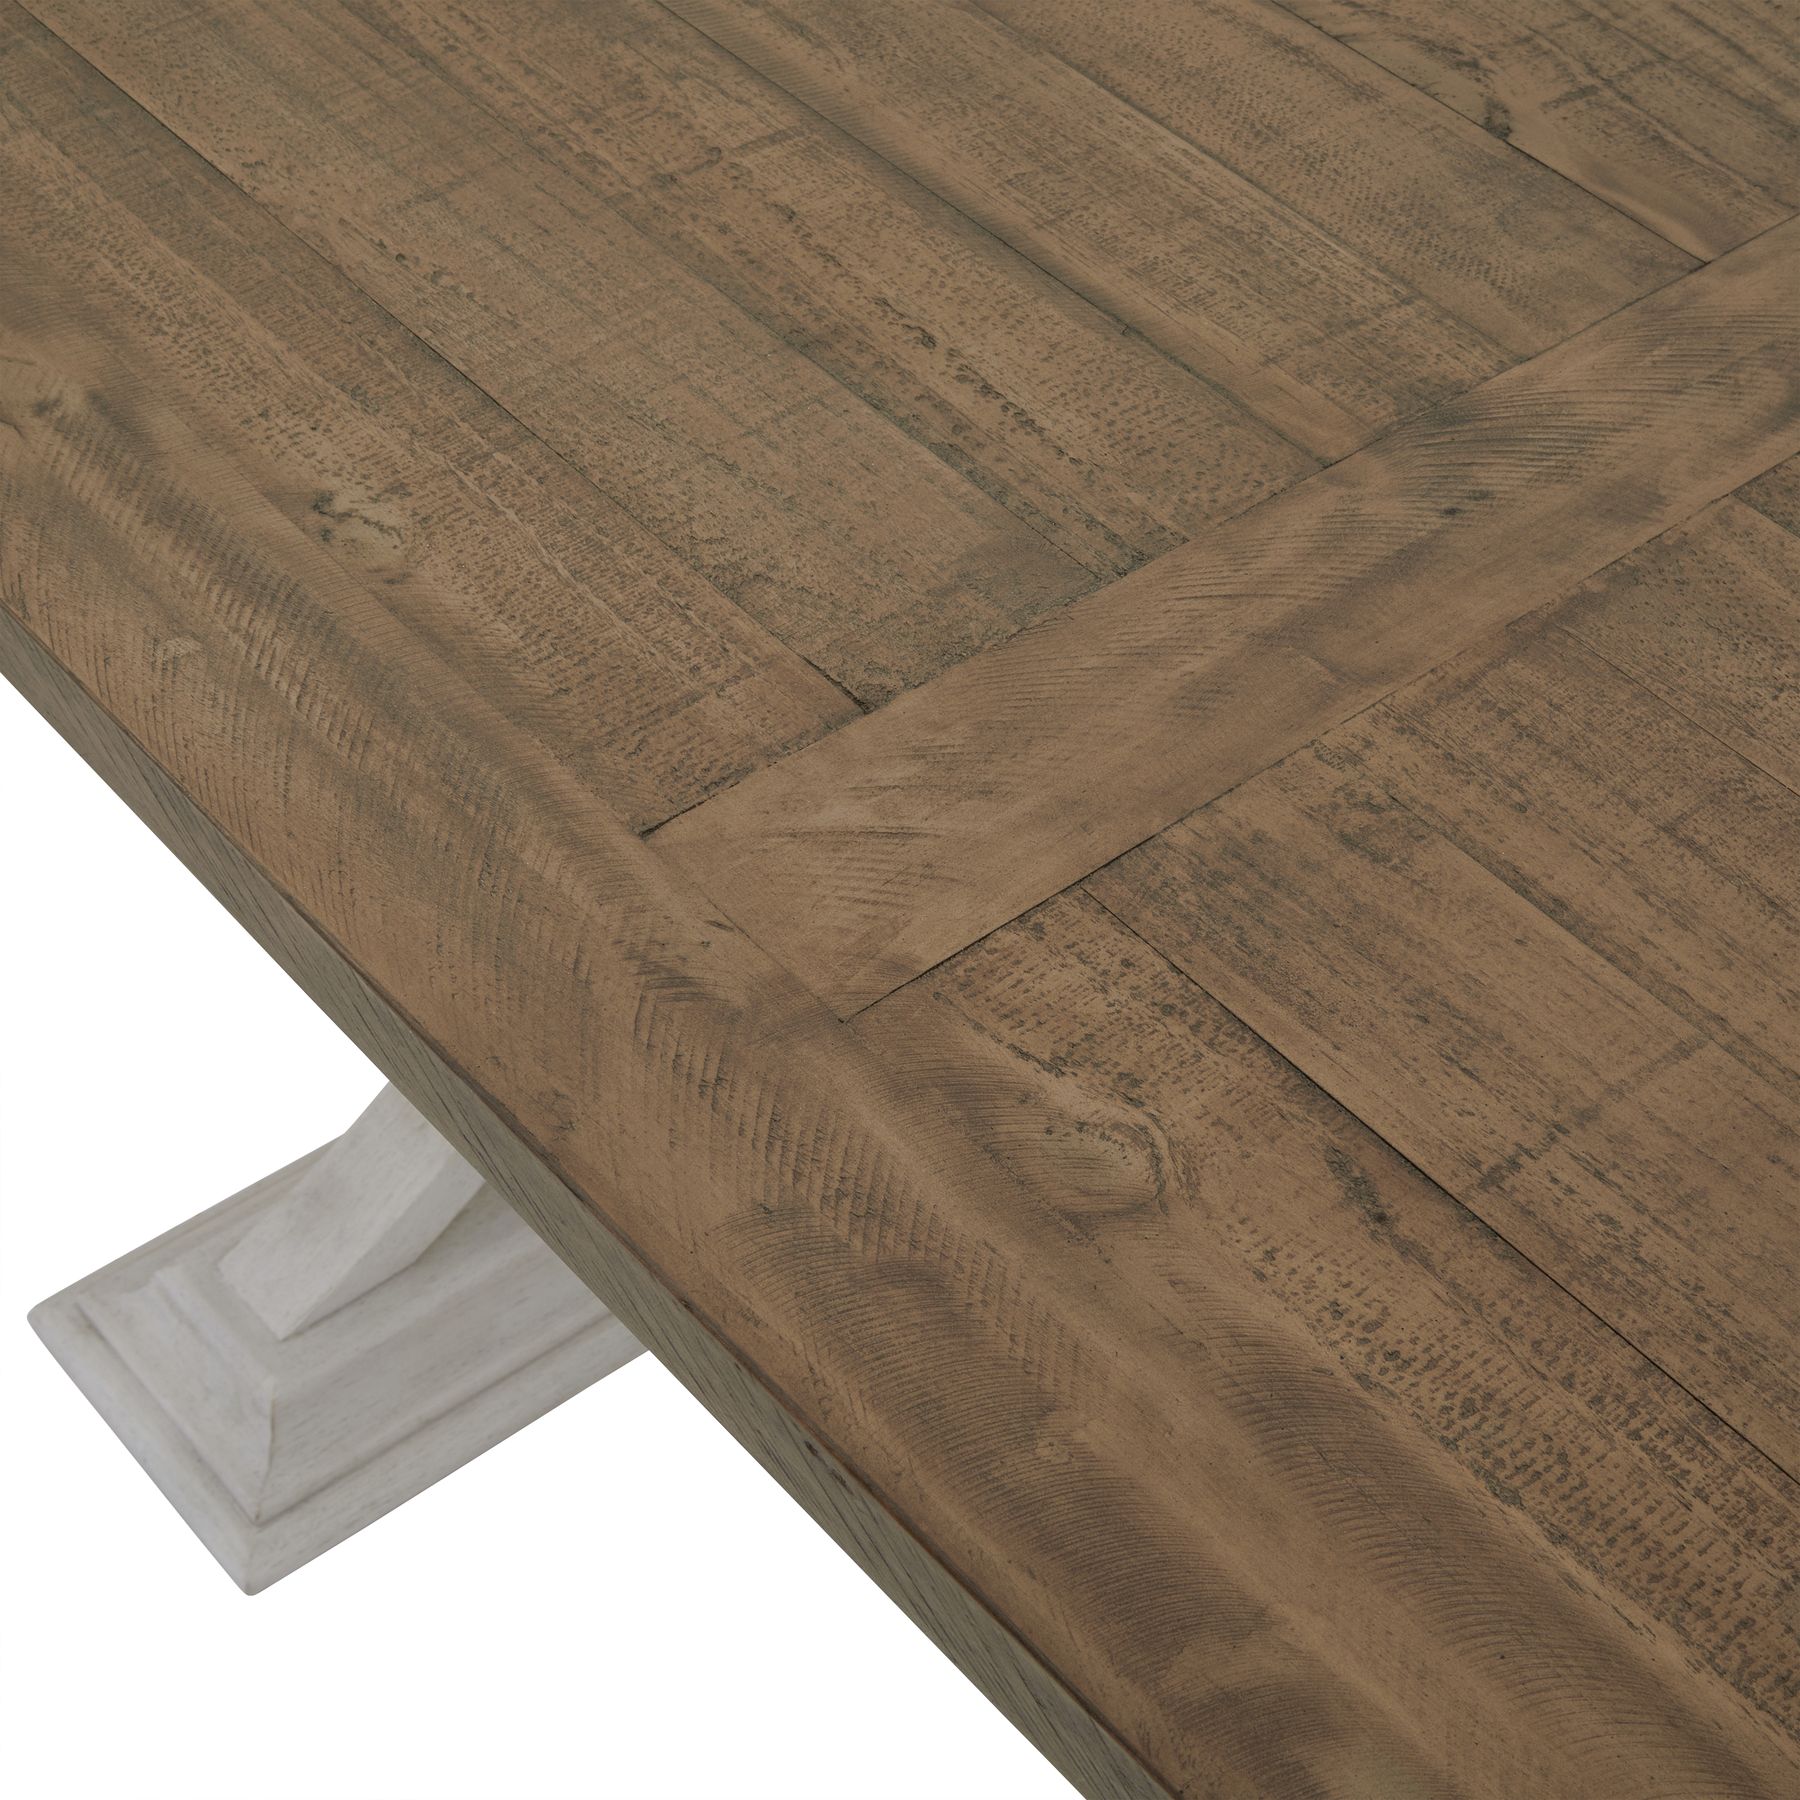 Luna Collection Rectangular Dining Table - Image 2